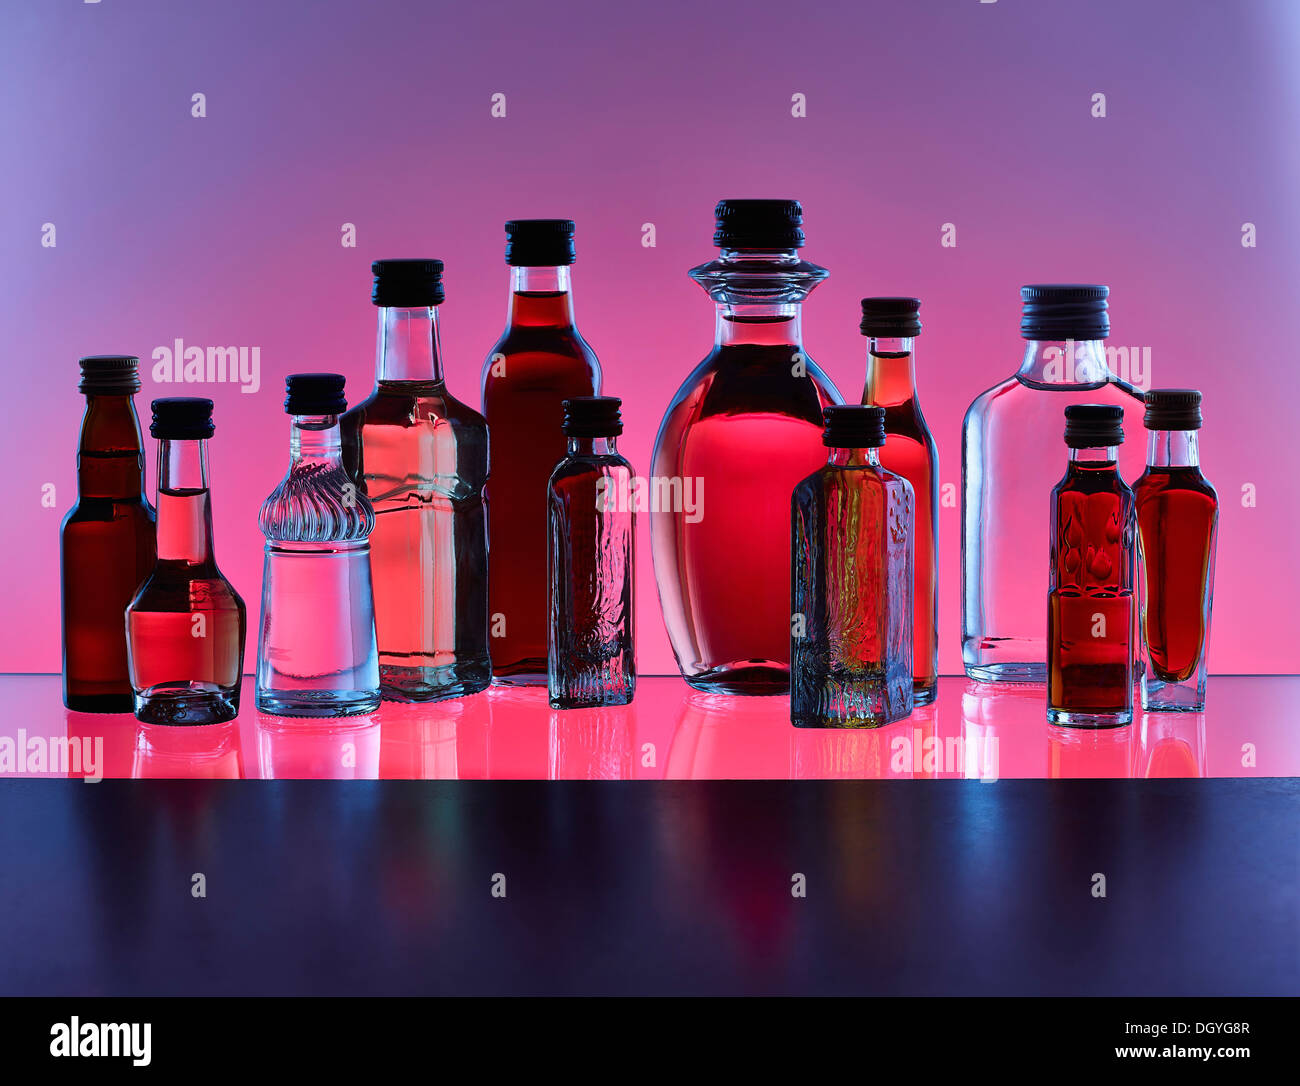 A grouping of various miniature bottles of alcohol without labels, back lit, colored background Stock Photo